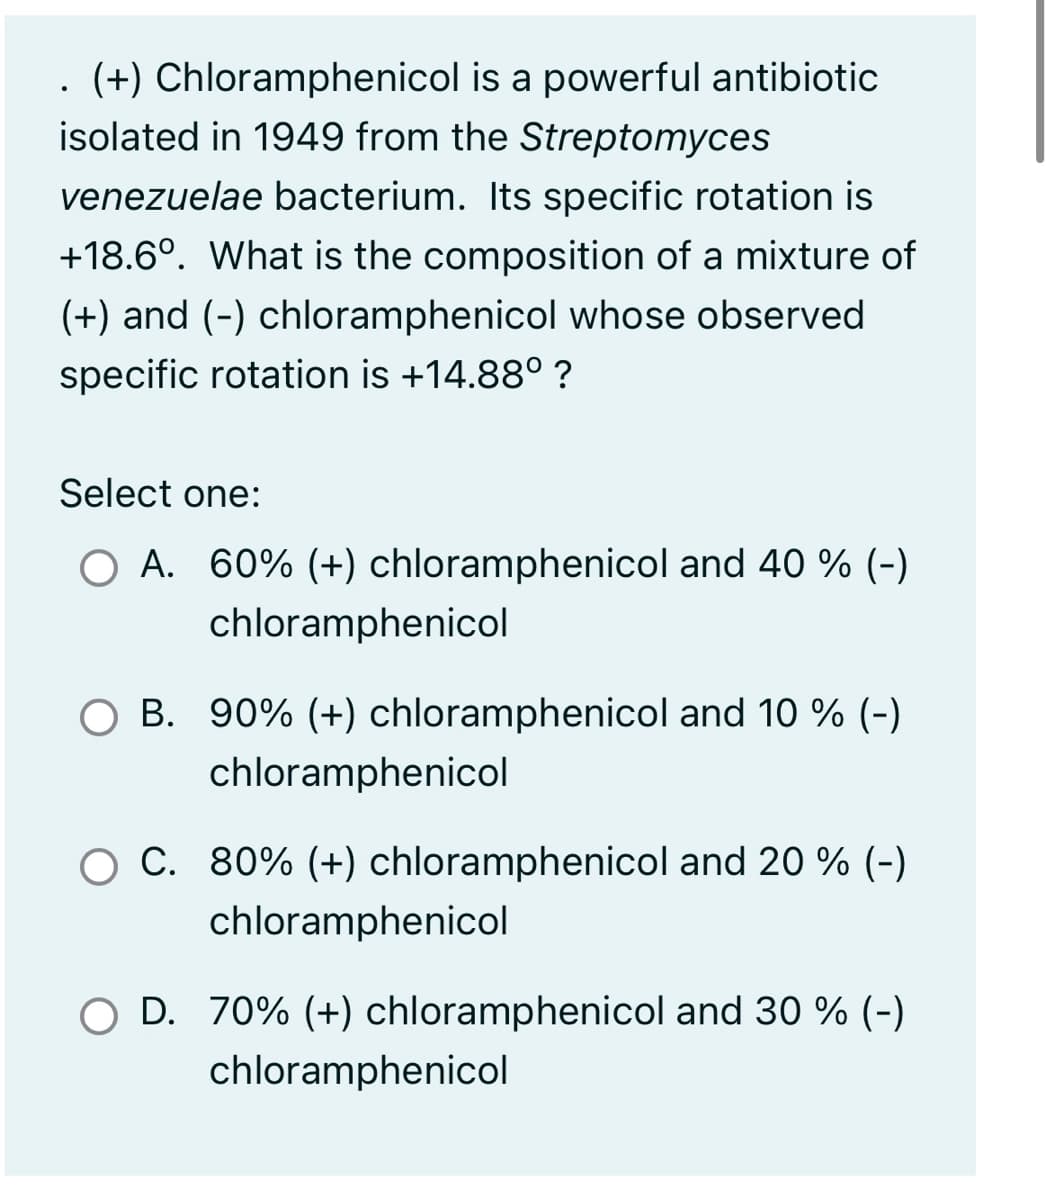 . (+) Chloramphenicol is a powerful antibiotic
isolated in 1949 from the Streptomyces
venezuelae bacterium. Its specific rotation is
+18.6°. What is the composition of a mixture of
(+) and (-) chloramphenicol whose observed
specific rotation is +14.88⁰ ?
Select one:
O A. 60% (+) chloramphenicol and 40 % (-)
chloramphenicol
B. 90% (+) chloramphenicol and 10 % (-)
chloramphenicol
O C. 80% (+) chloramphenicol and 20 % (-)
chloramphenicol
D. 70% (+) chloramphenicol and 30 % (-)
chloramphenicol